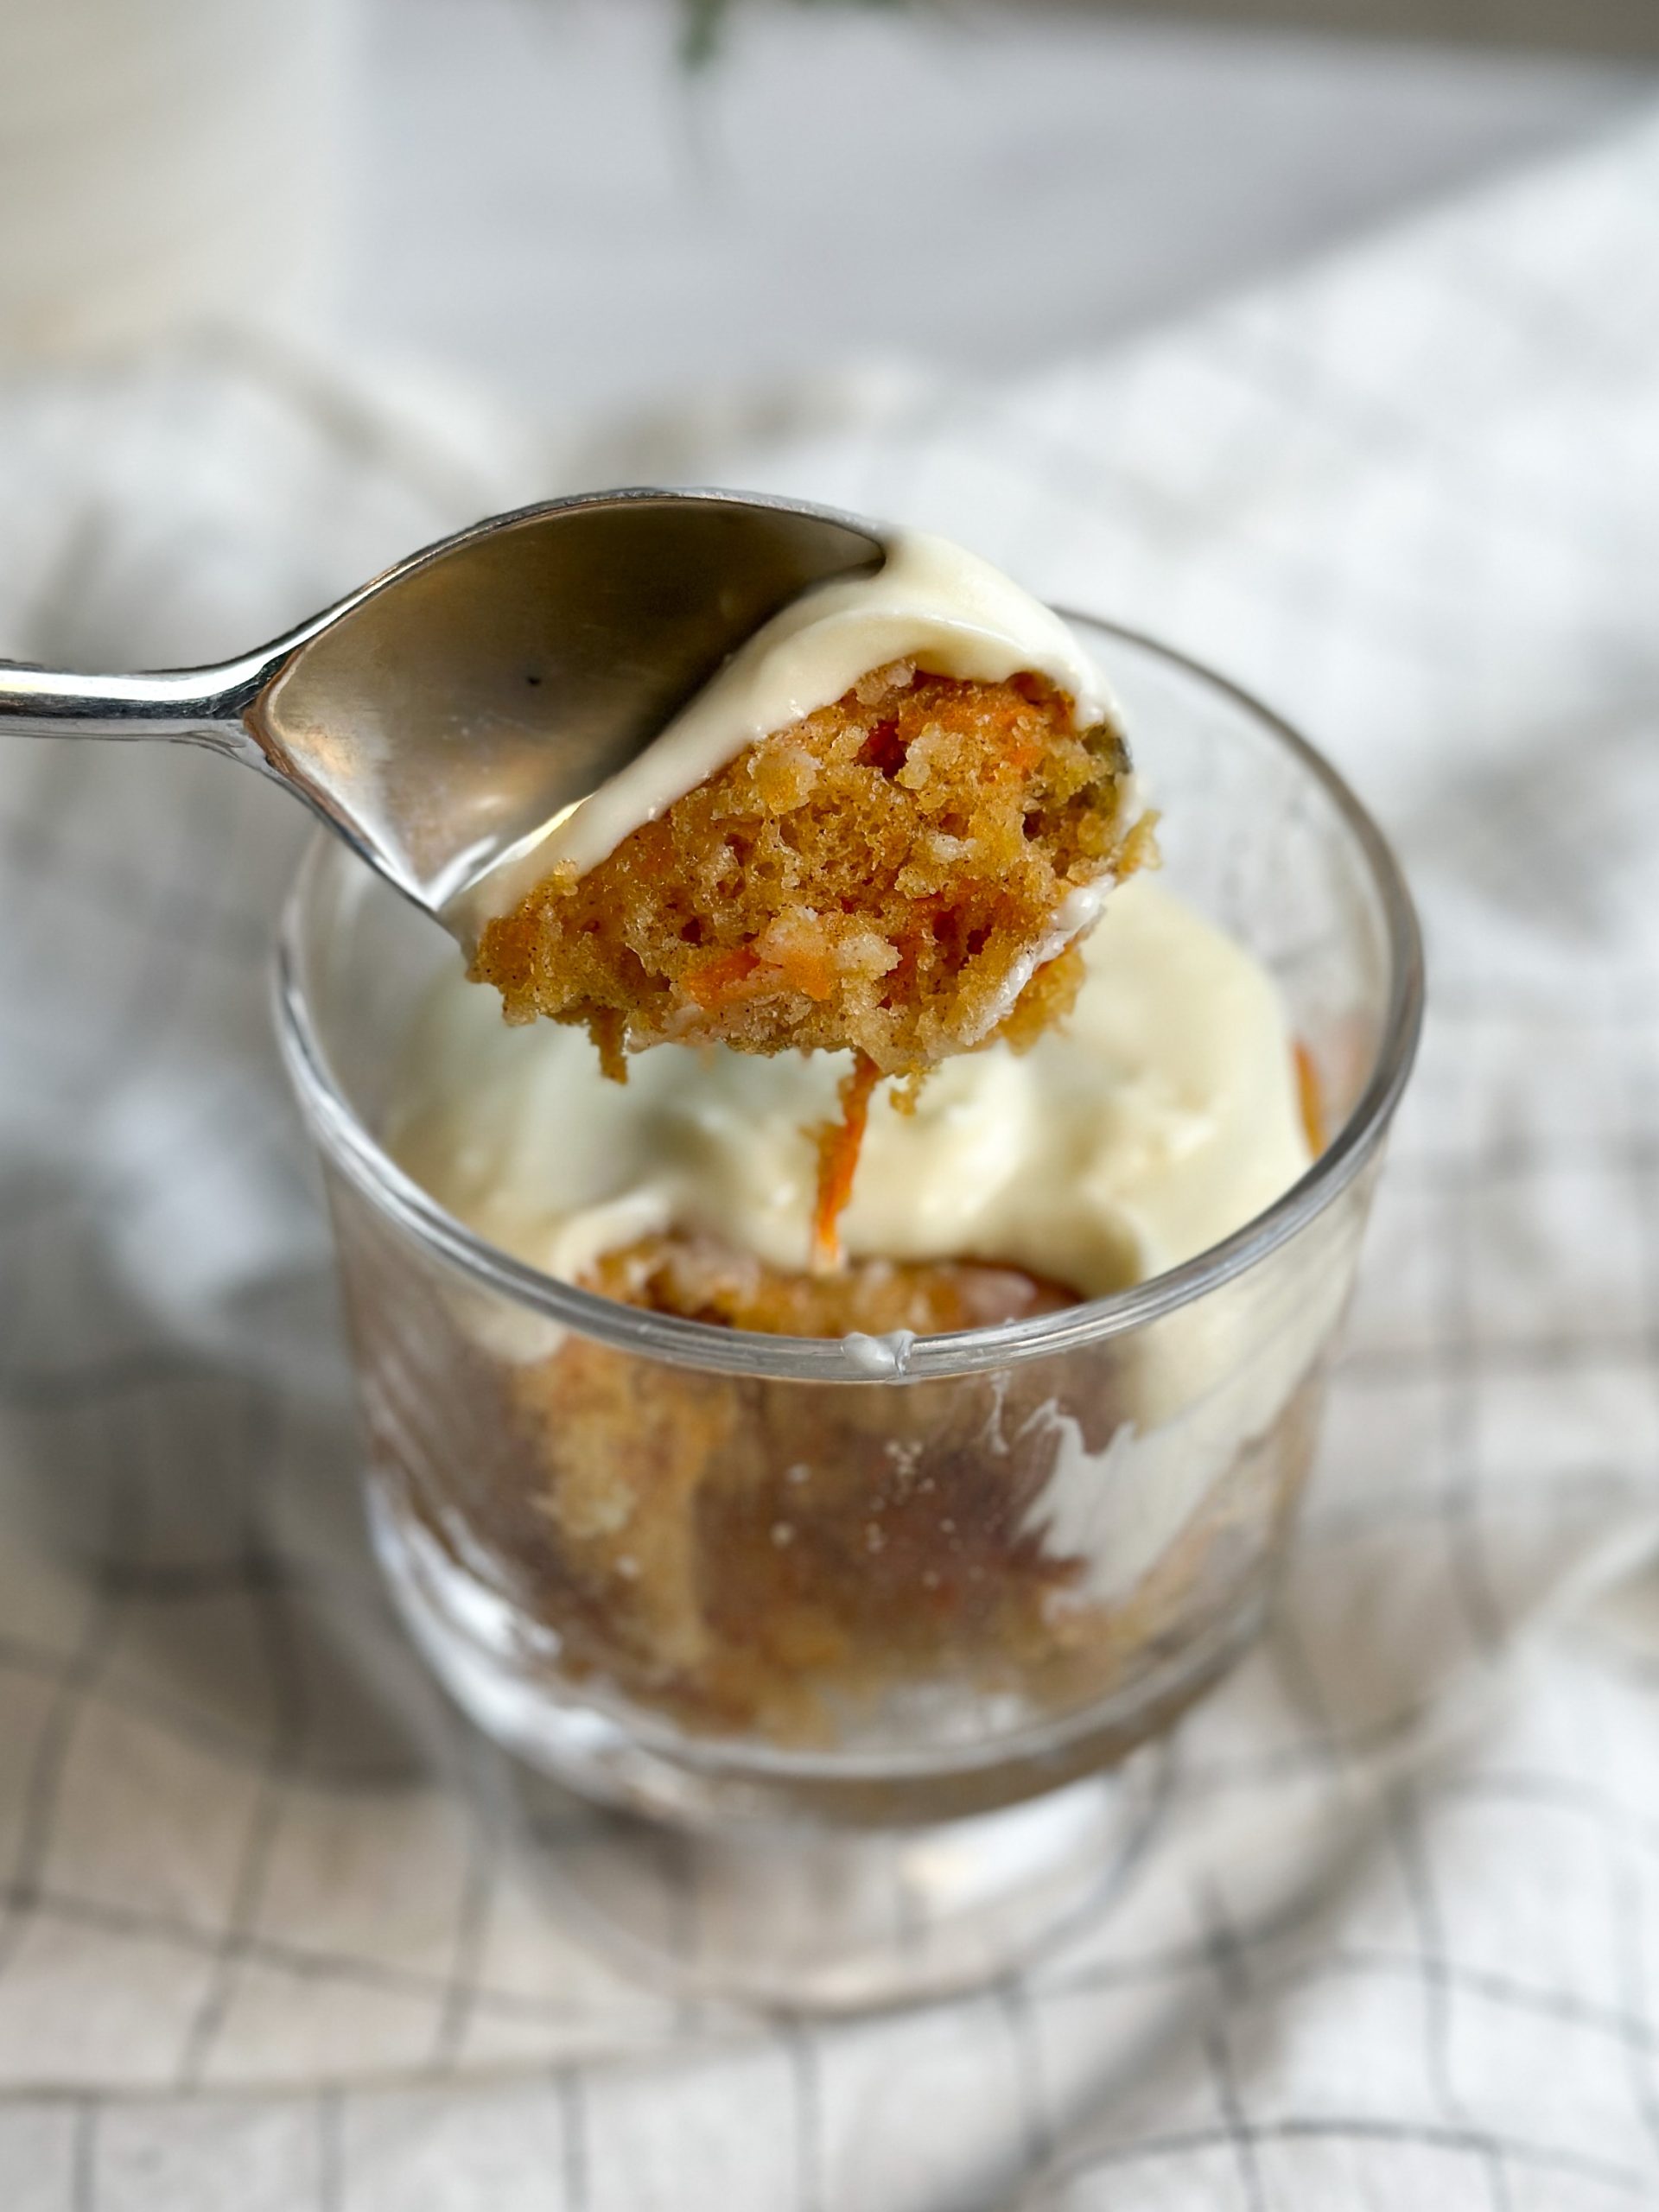 carrot mug cake in a glass mug with a spoon taking out a bite revealing soft moist interior